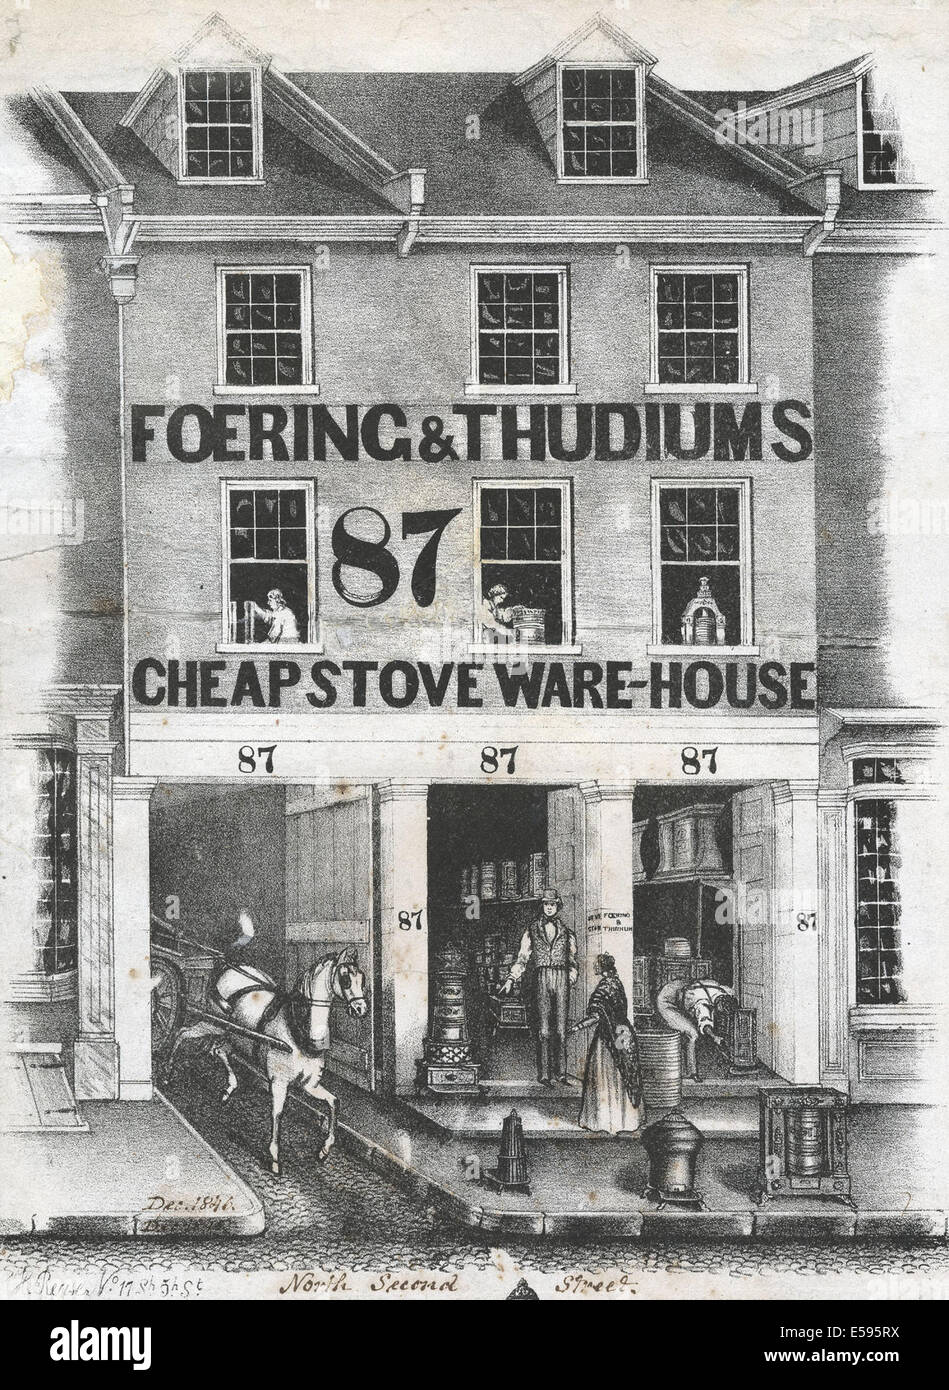 Foering & Thudiums cheap stove ware-house, [December 1846] Stock Photo